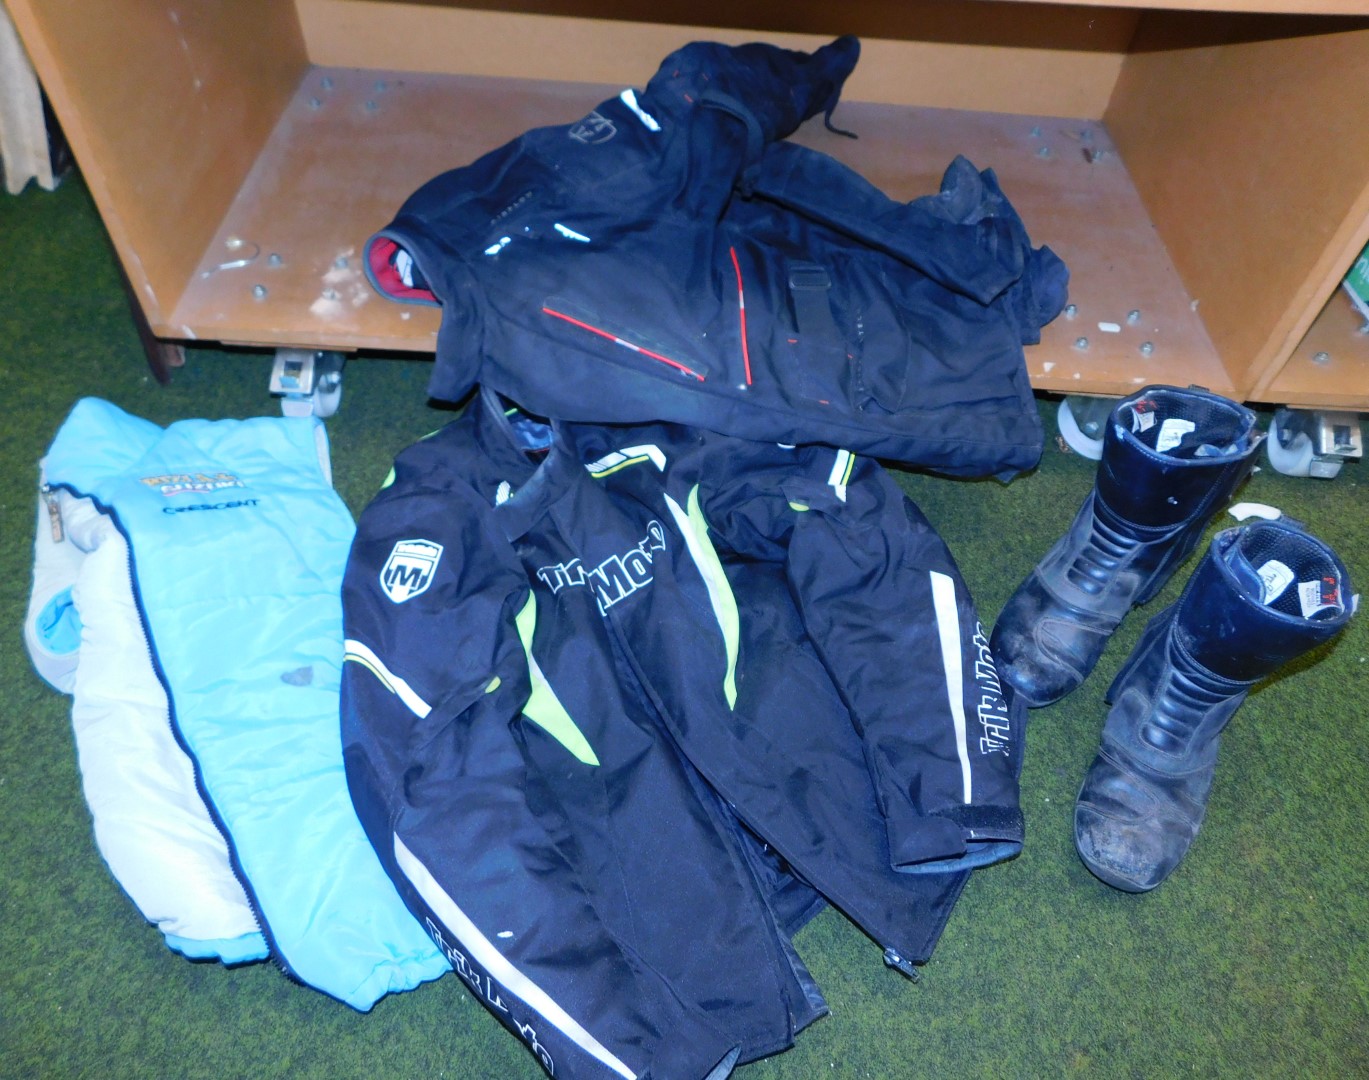 Motorcycle related clothing, including a pair of size 8 motorcycle boots, a Suzuki Risler+ Crescent